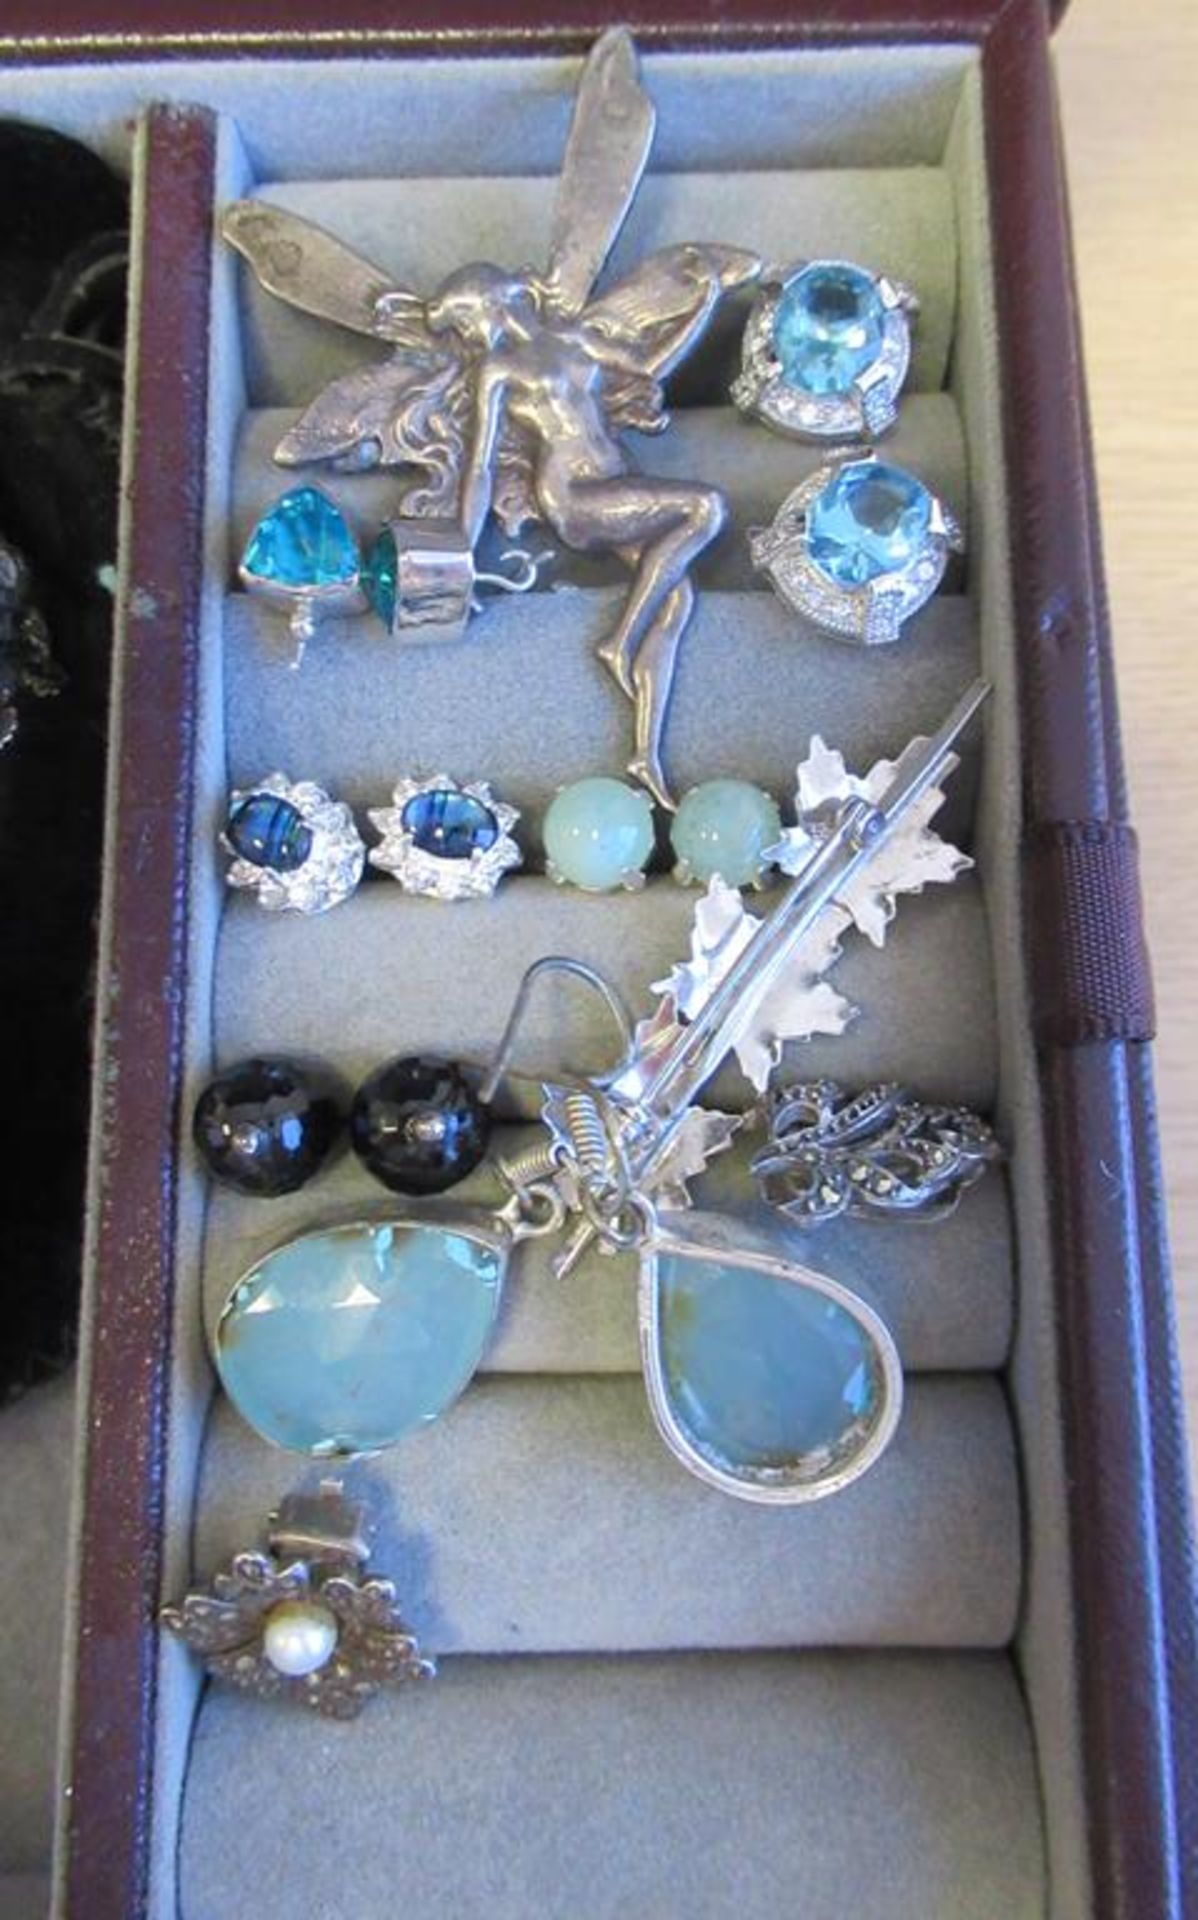 Thomas Sabo Silver Bracelet, Various chains, Rings etc Some Marked 925, Sapphire Stud Earrings etc - Image 2 of 5